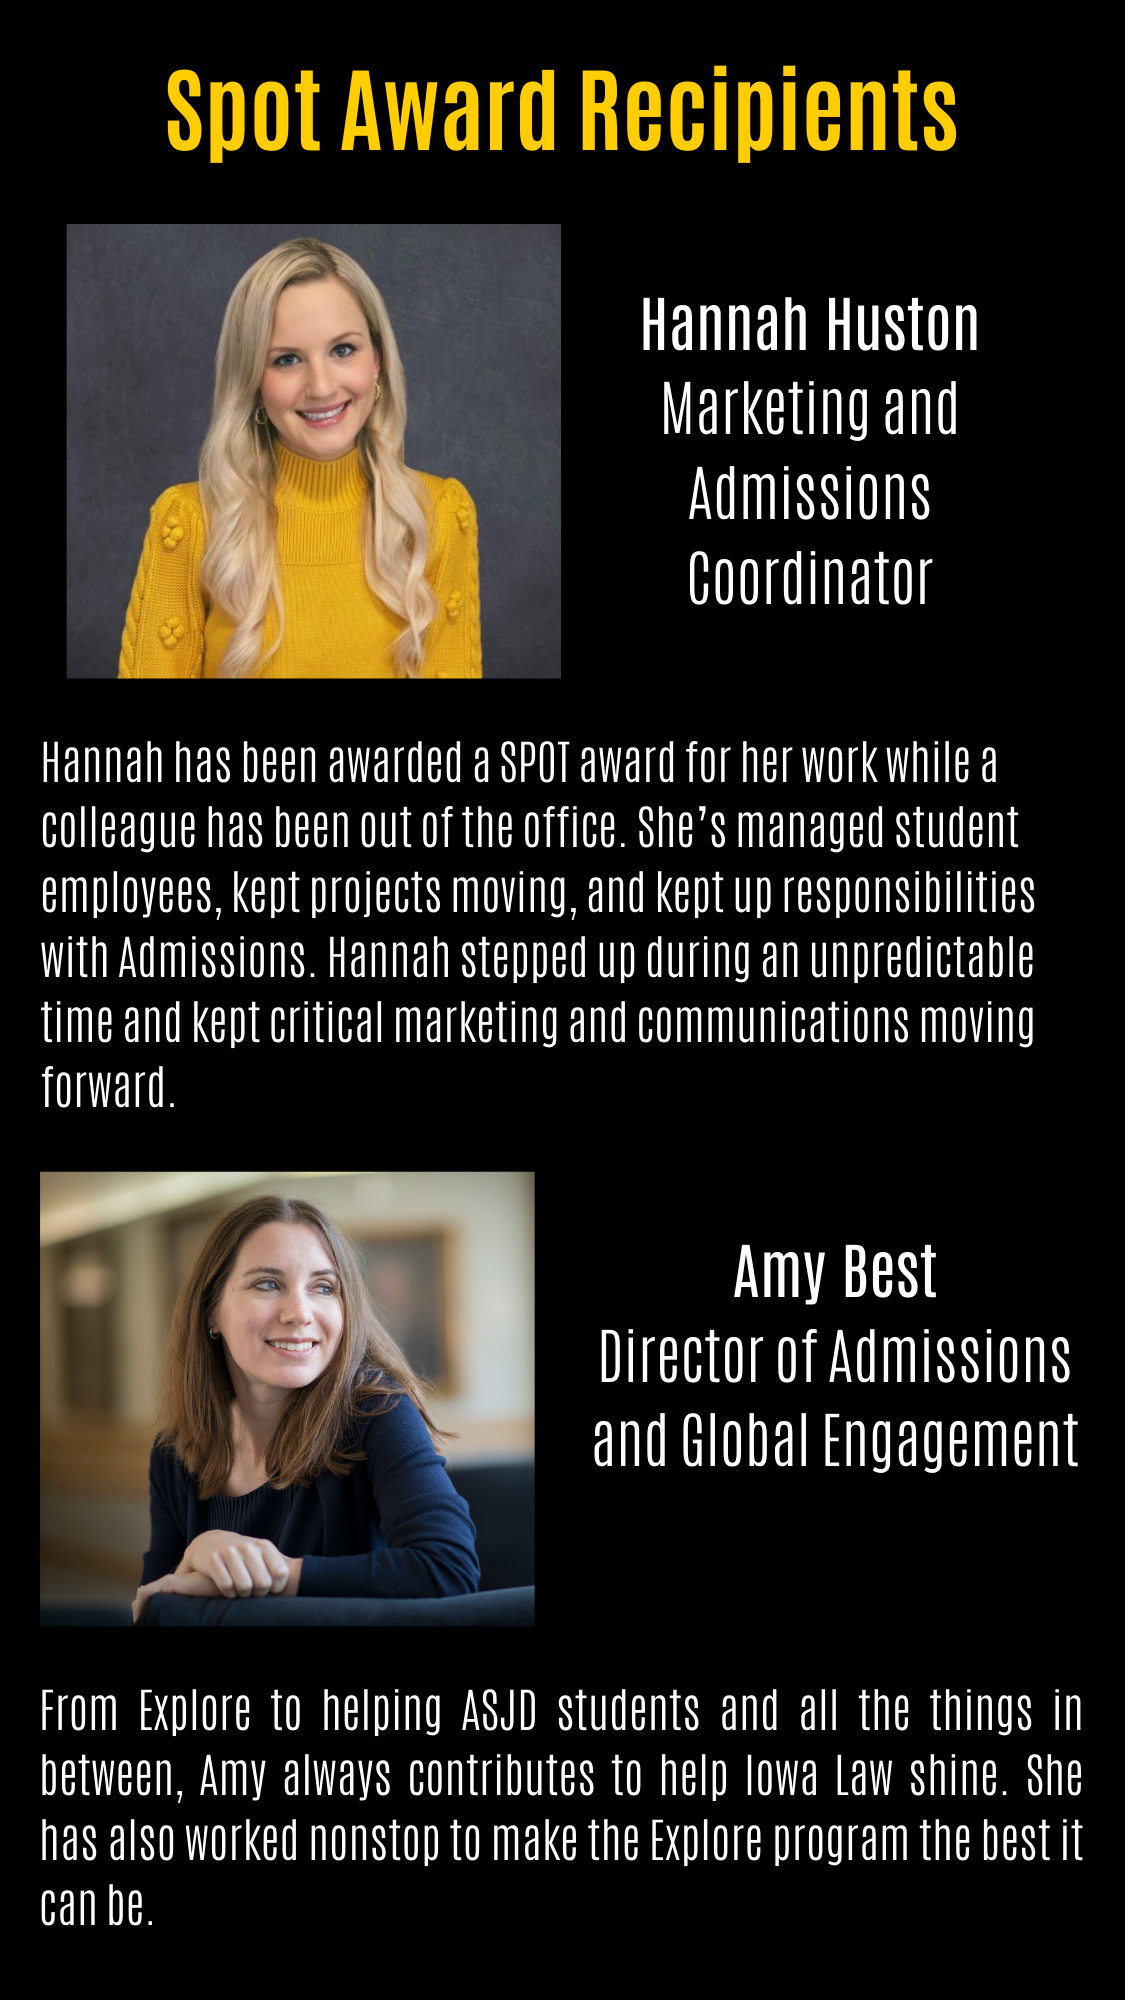 Spot Award Recipients Hannah Huston Marketing and Admissions Coordinator Hannah has been awarded a SPOT award for her work while a colleague has been out of the office. She’s managed student employees, kept projects moving, and kept up responsibilities with Admissions. Hannah stepped up during an unpredictable time and kept critical marketing and communications moving forward. Amy Best Director of Admissions and Global Engagement From Explore to helping ASJD students and all the things in between, Amy always contributes to help Iowa Law shine. She has also worked nonstop to make the Explore program the best it can be.